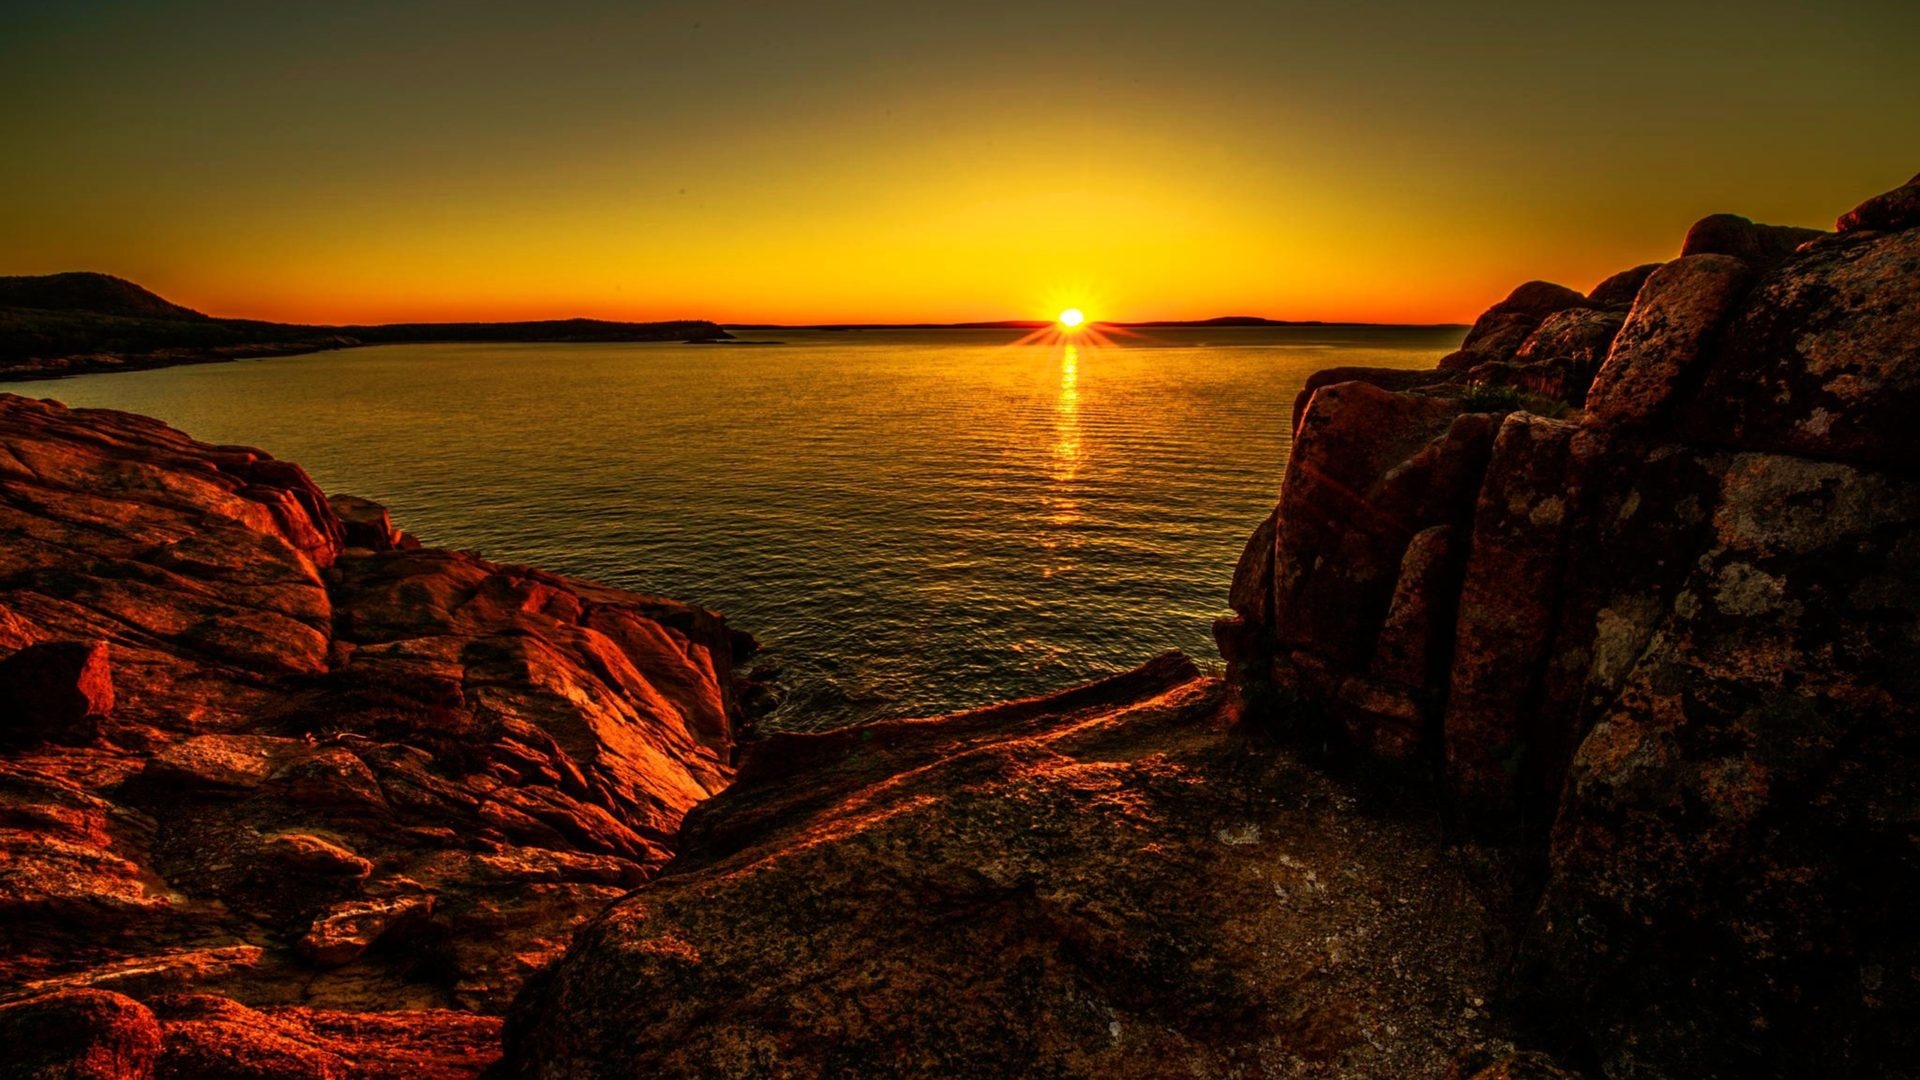 Acadia National Park, Sunset beauty, Tranquil moments, Nature's serenity, 1920x1080 Full HD Desktop